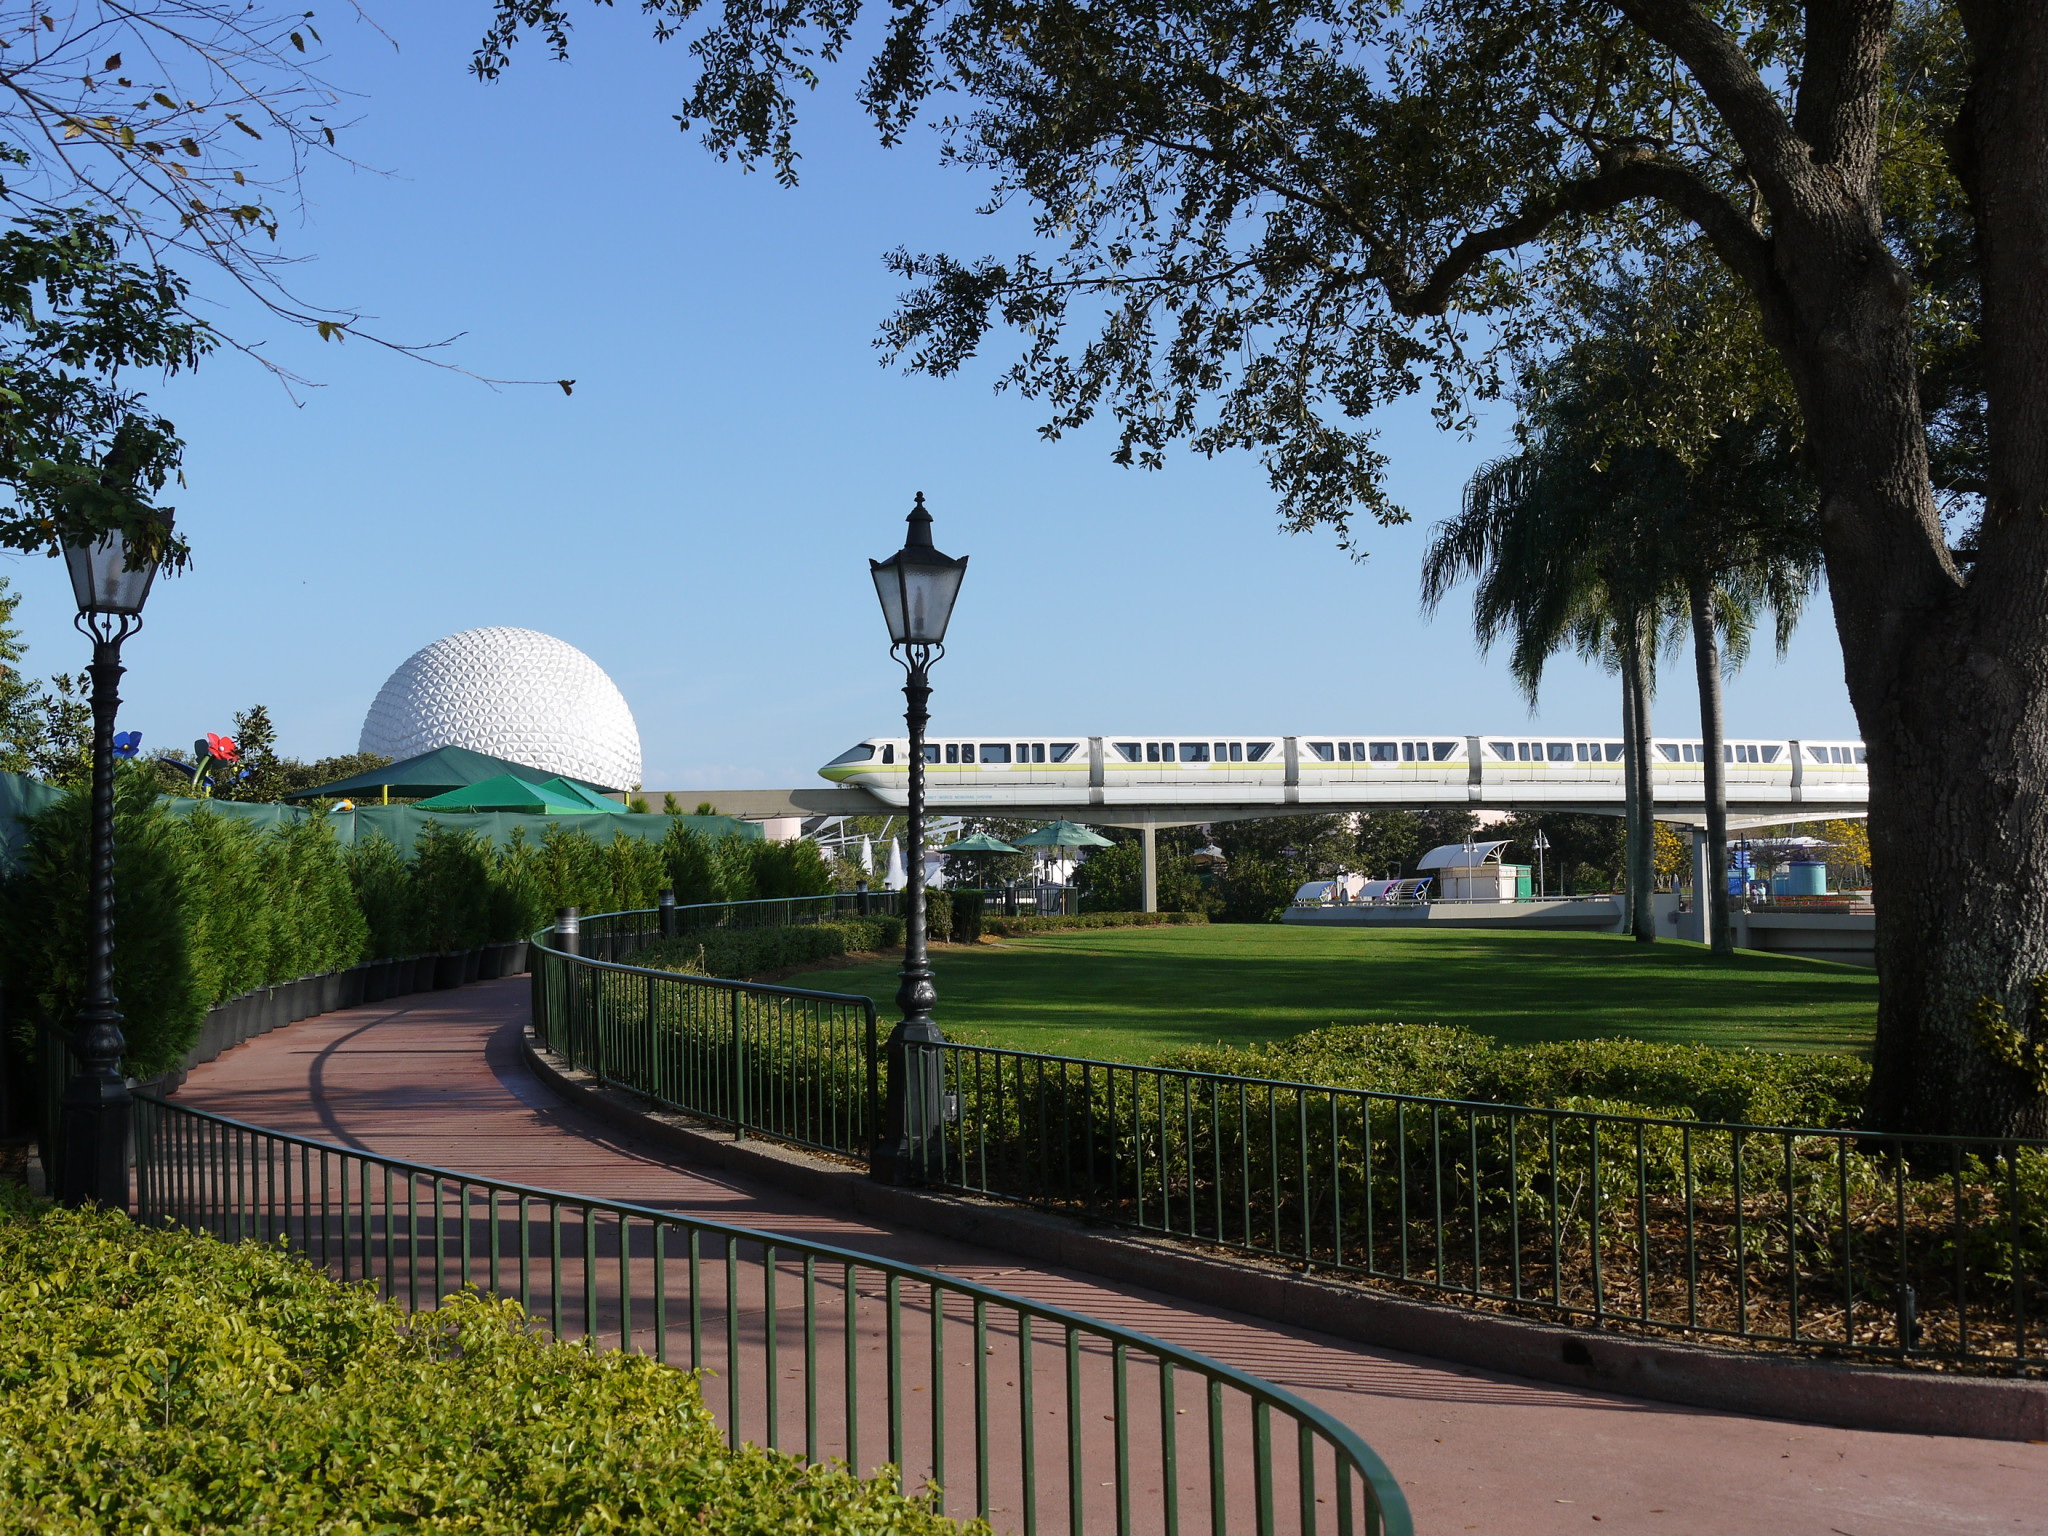 Top Mid-Day Break Spots at Epcot